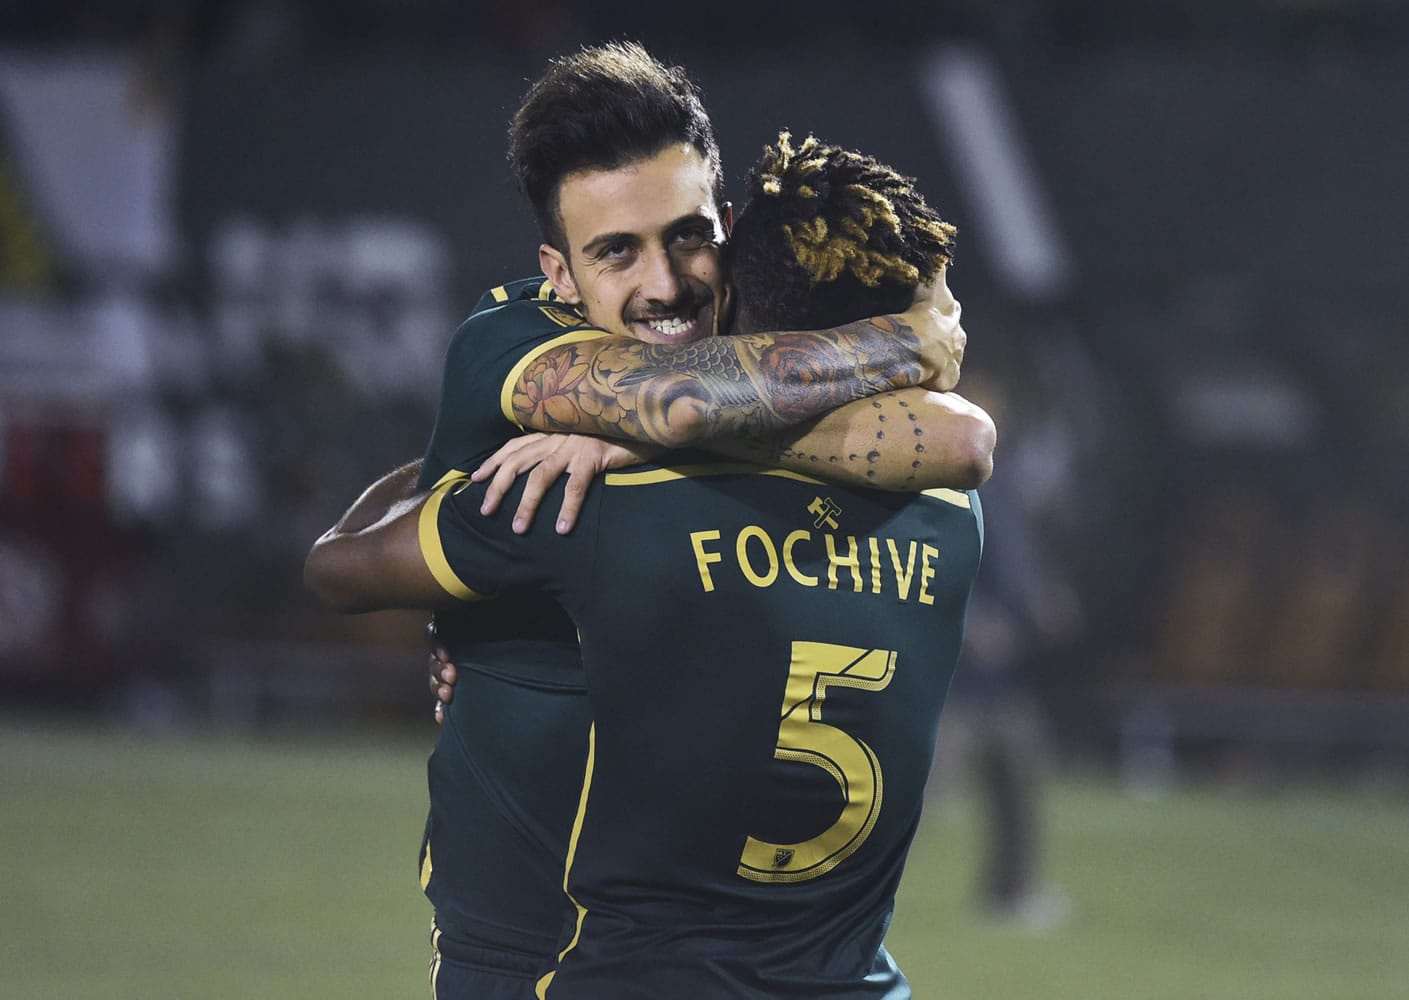 George Fochive (5), pictured celebrating with former Timber Maxi Urruti, on Tuesday was transferred to Viborg FF in Denmark, ending two years in Portland for the young midfielder.